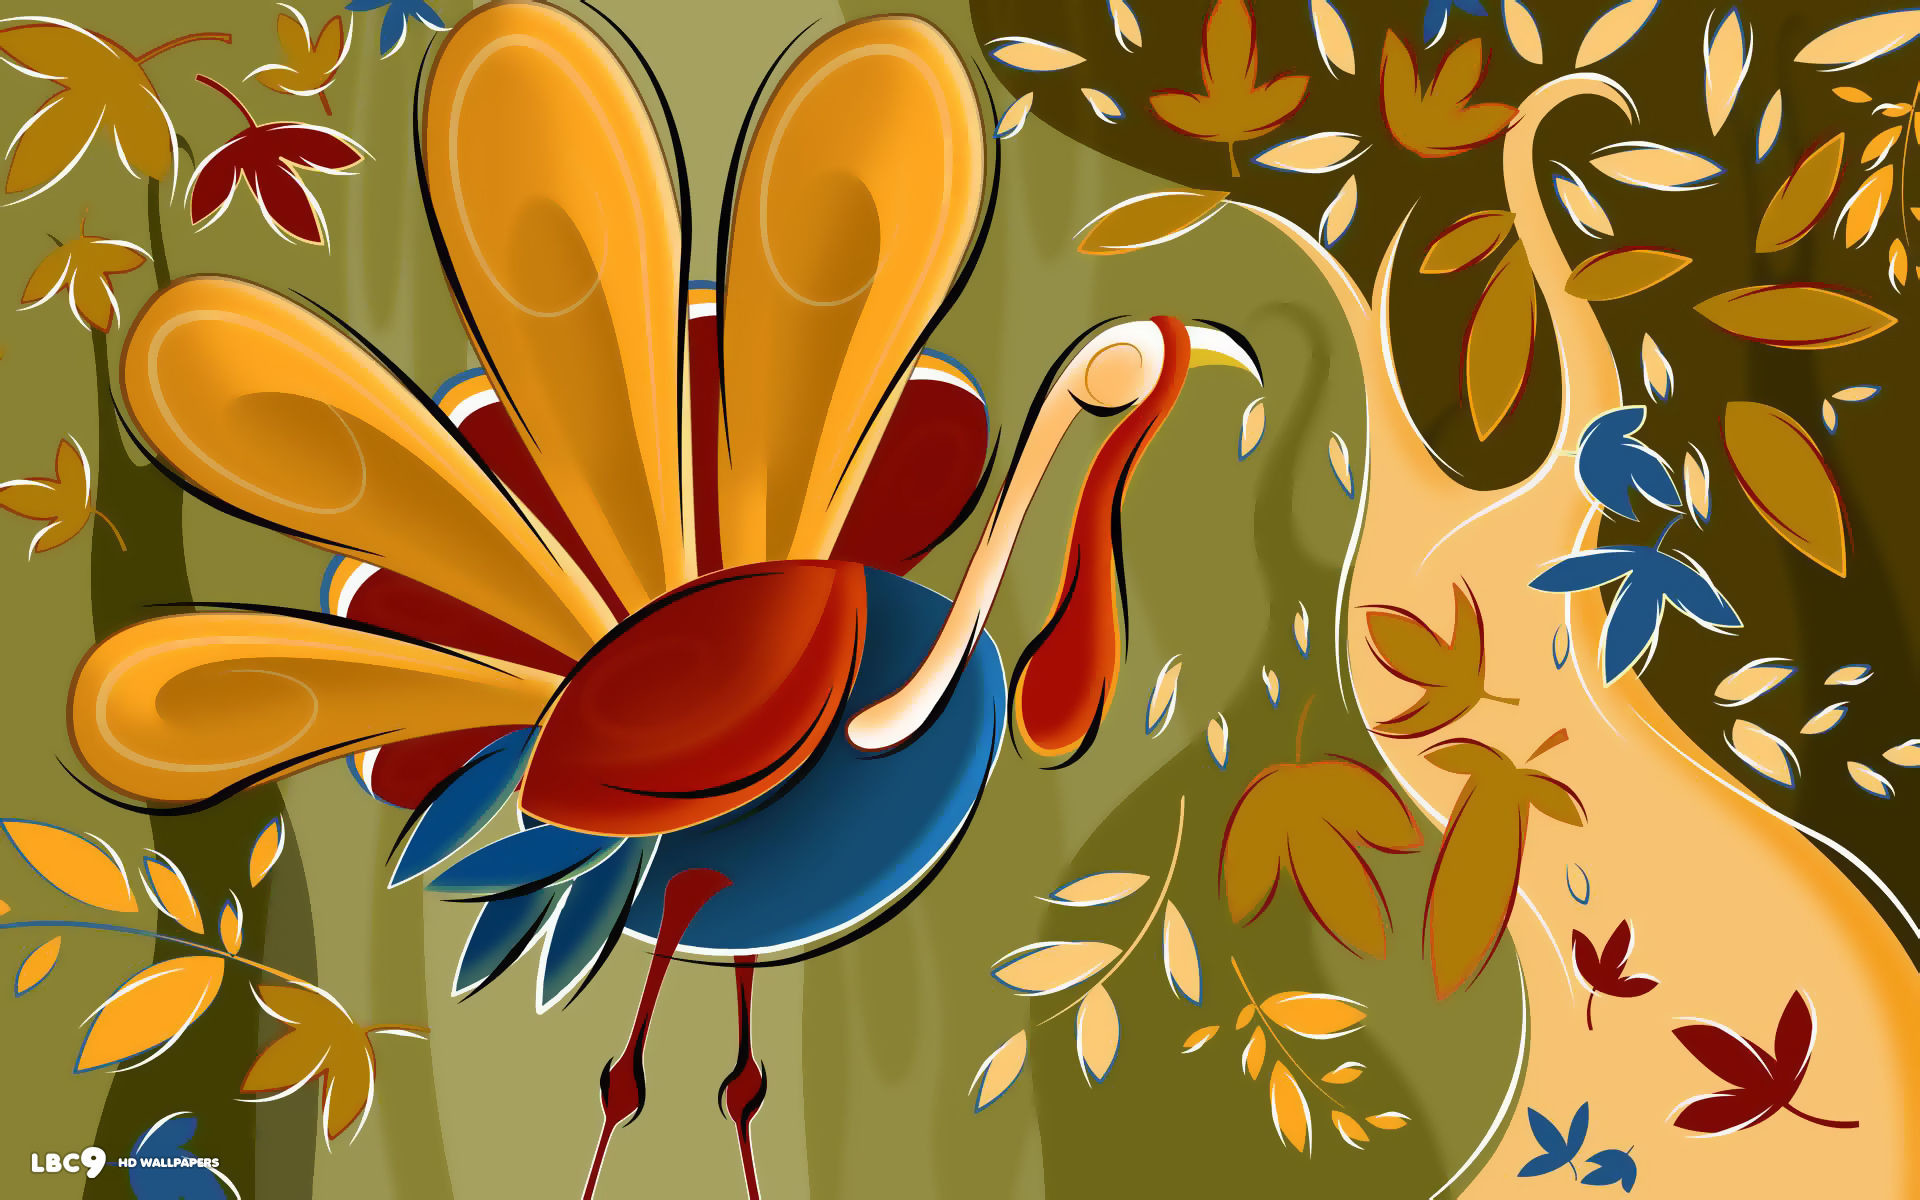 Thanksgiving 1920X1080 Wallpapers